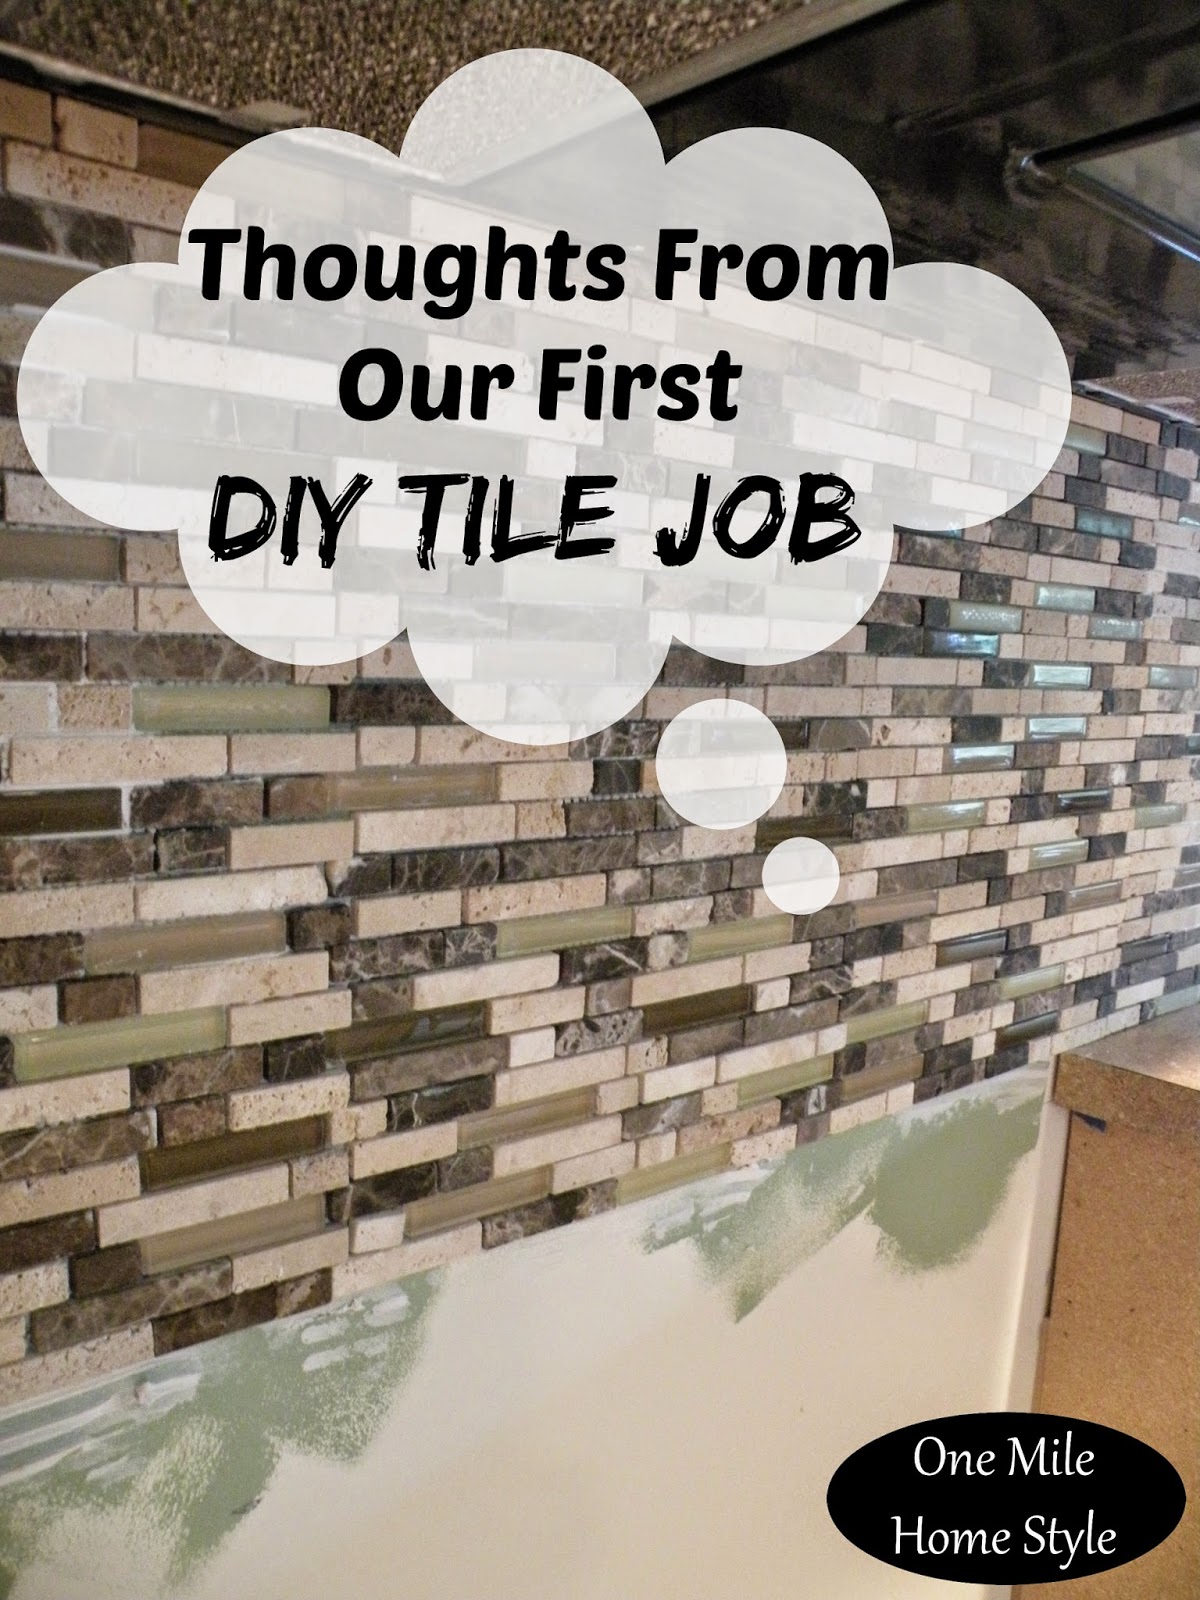 Thoughts from our first DIY tile job | One Mile Home Style